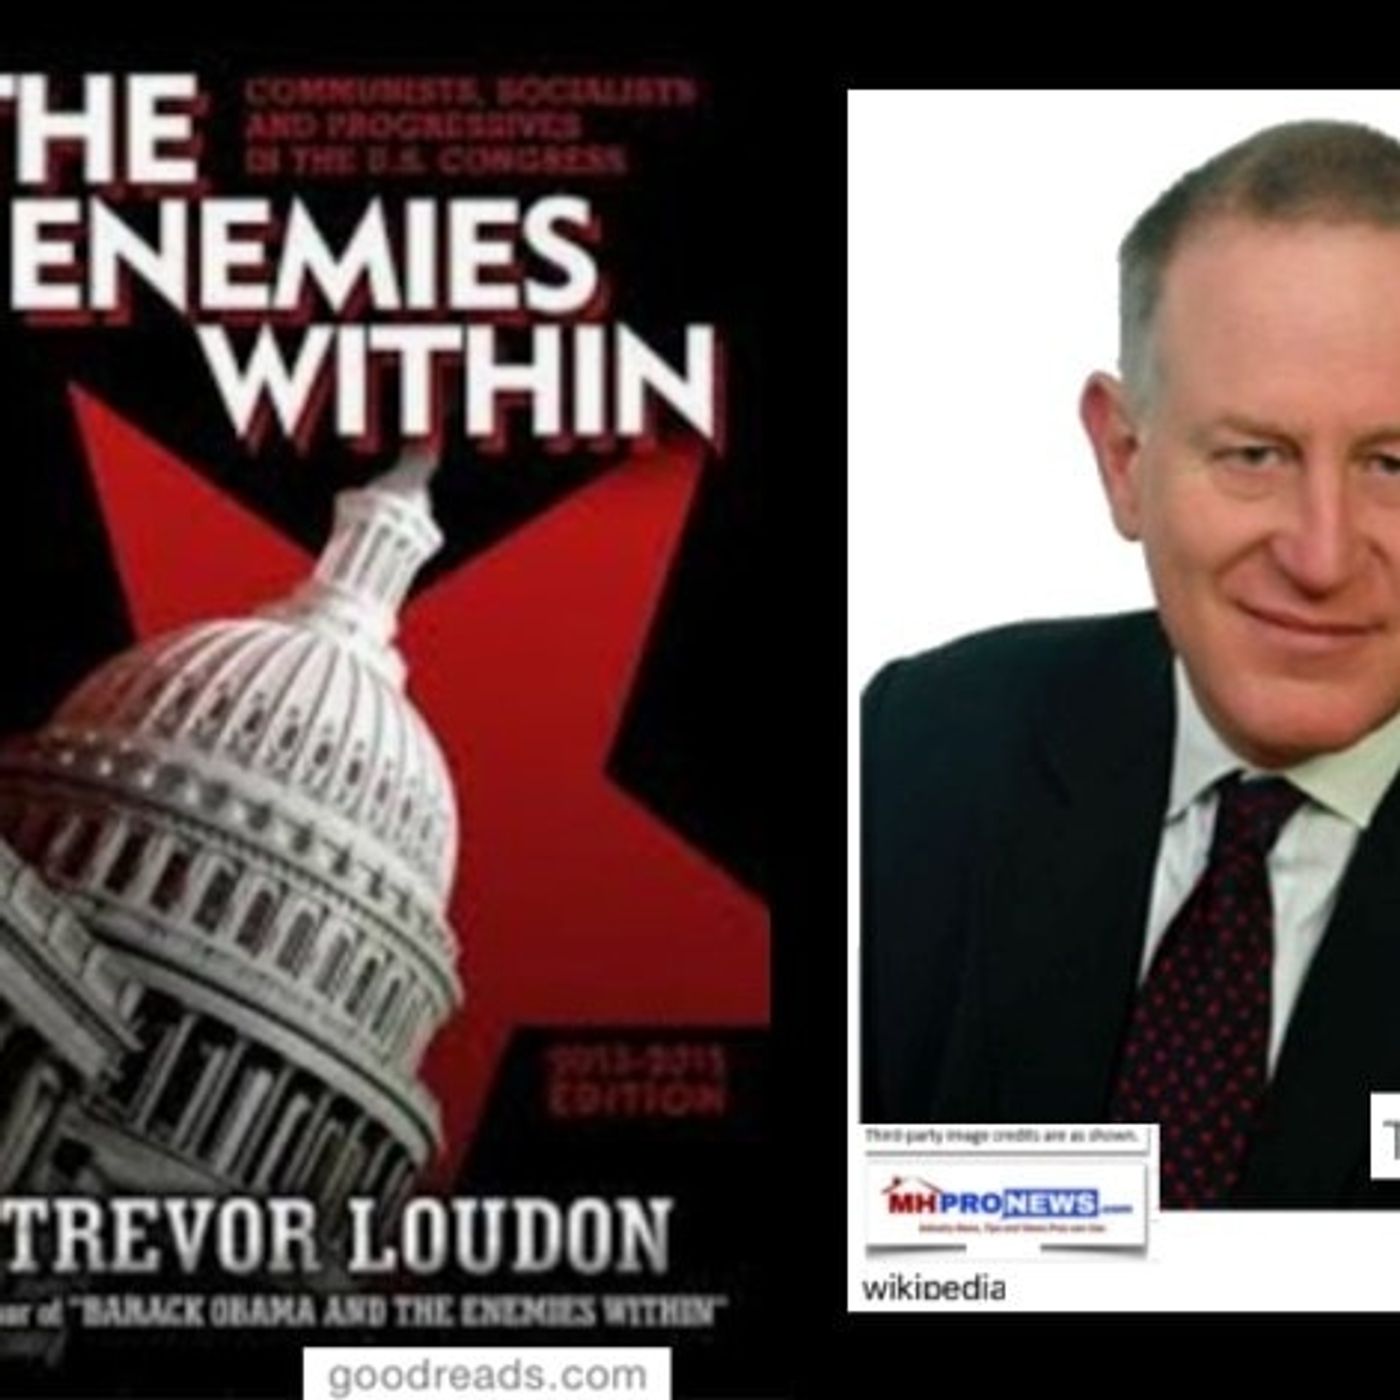 The Enemies Within - Communism in America with Trevor Loudon